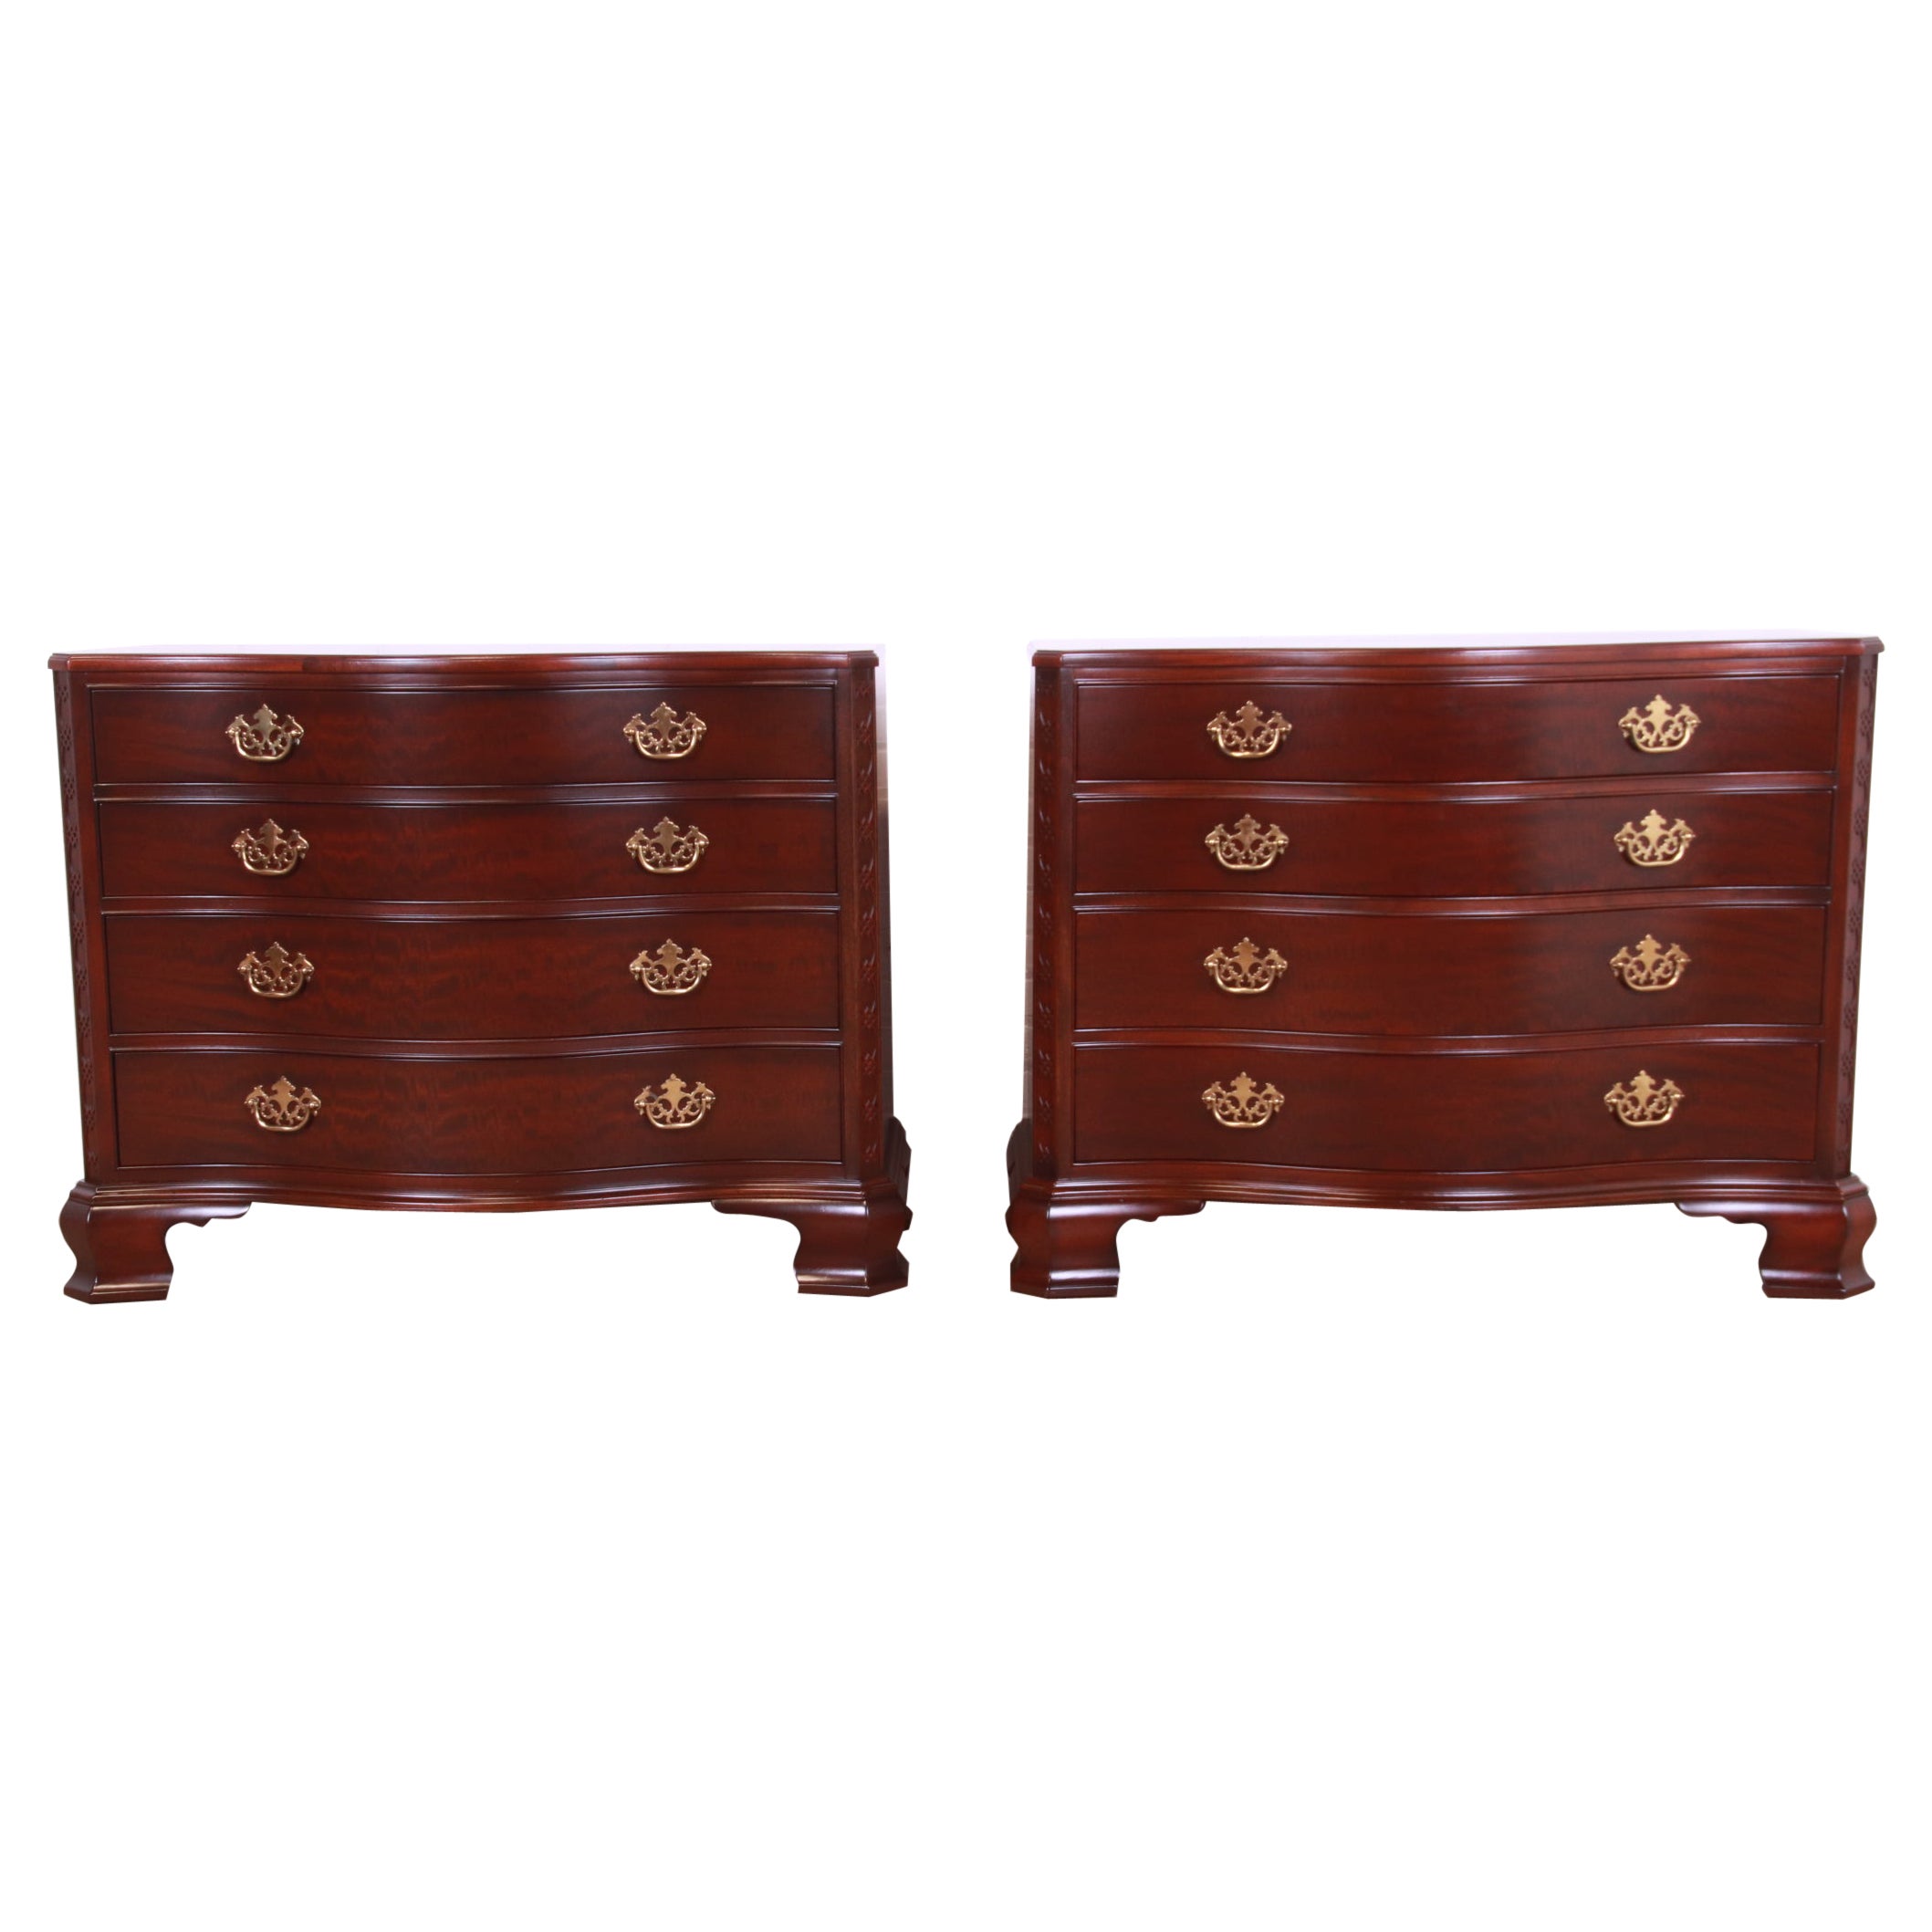 Baker Furniture Chippendale Carved Mahogany Serpentine Dresser Chests, Pair